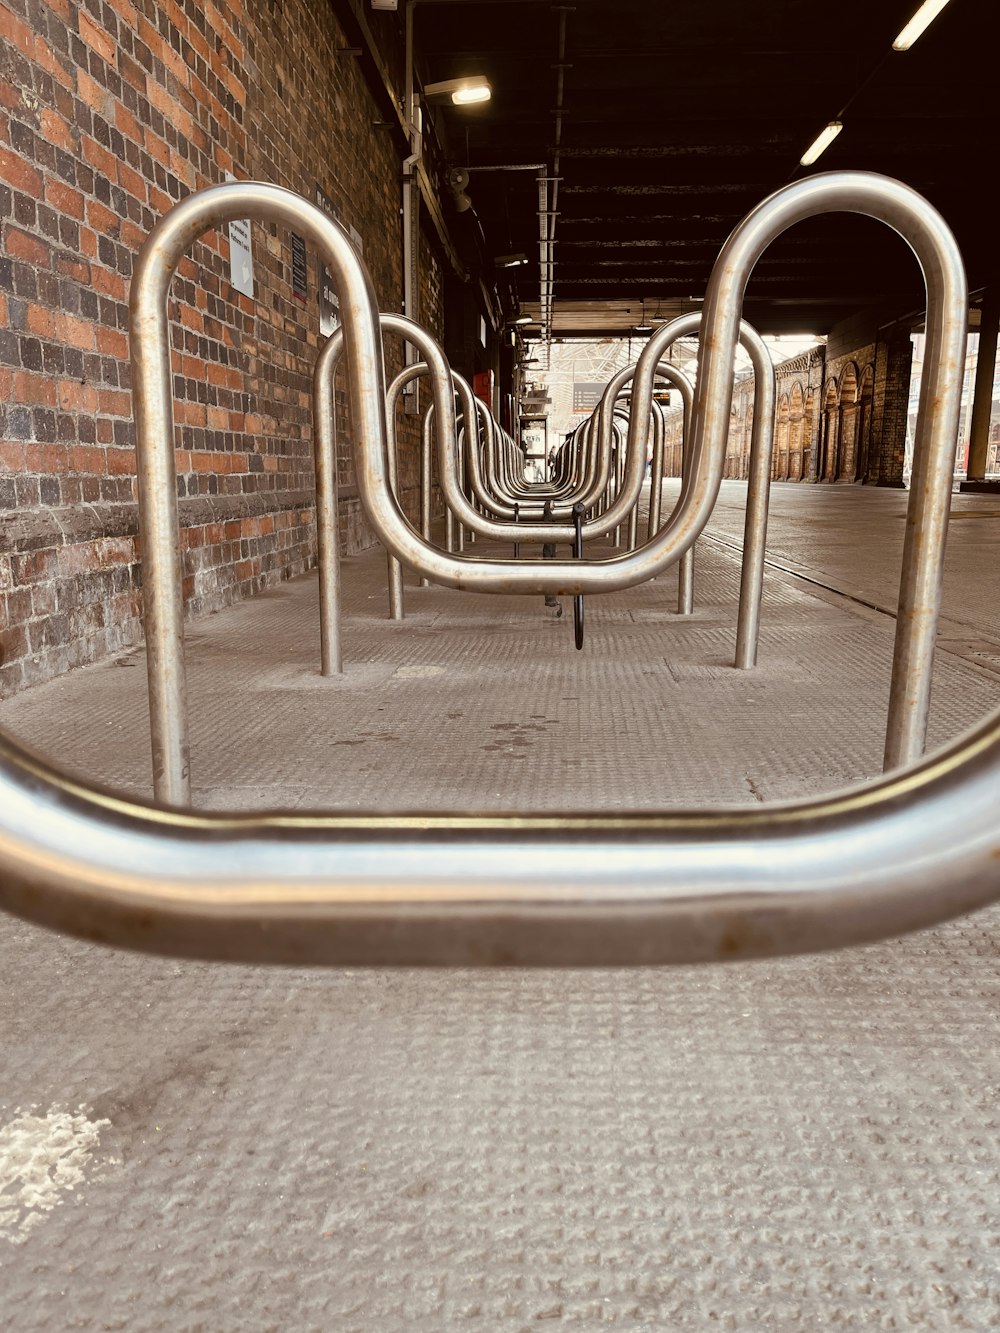 a row of metal railings in front of a brick wall